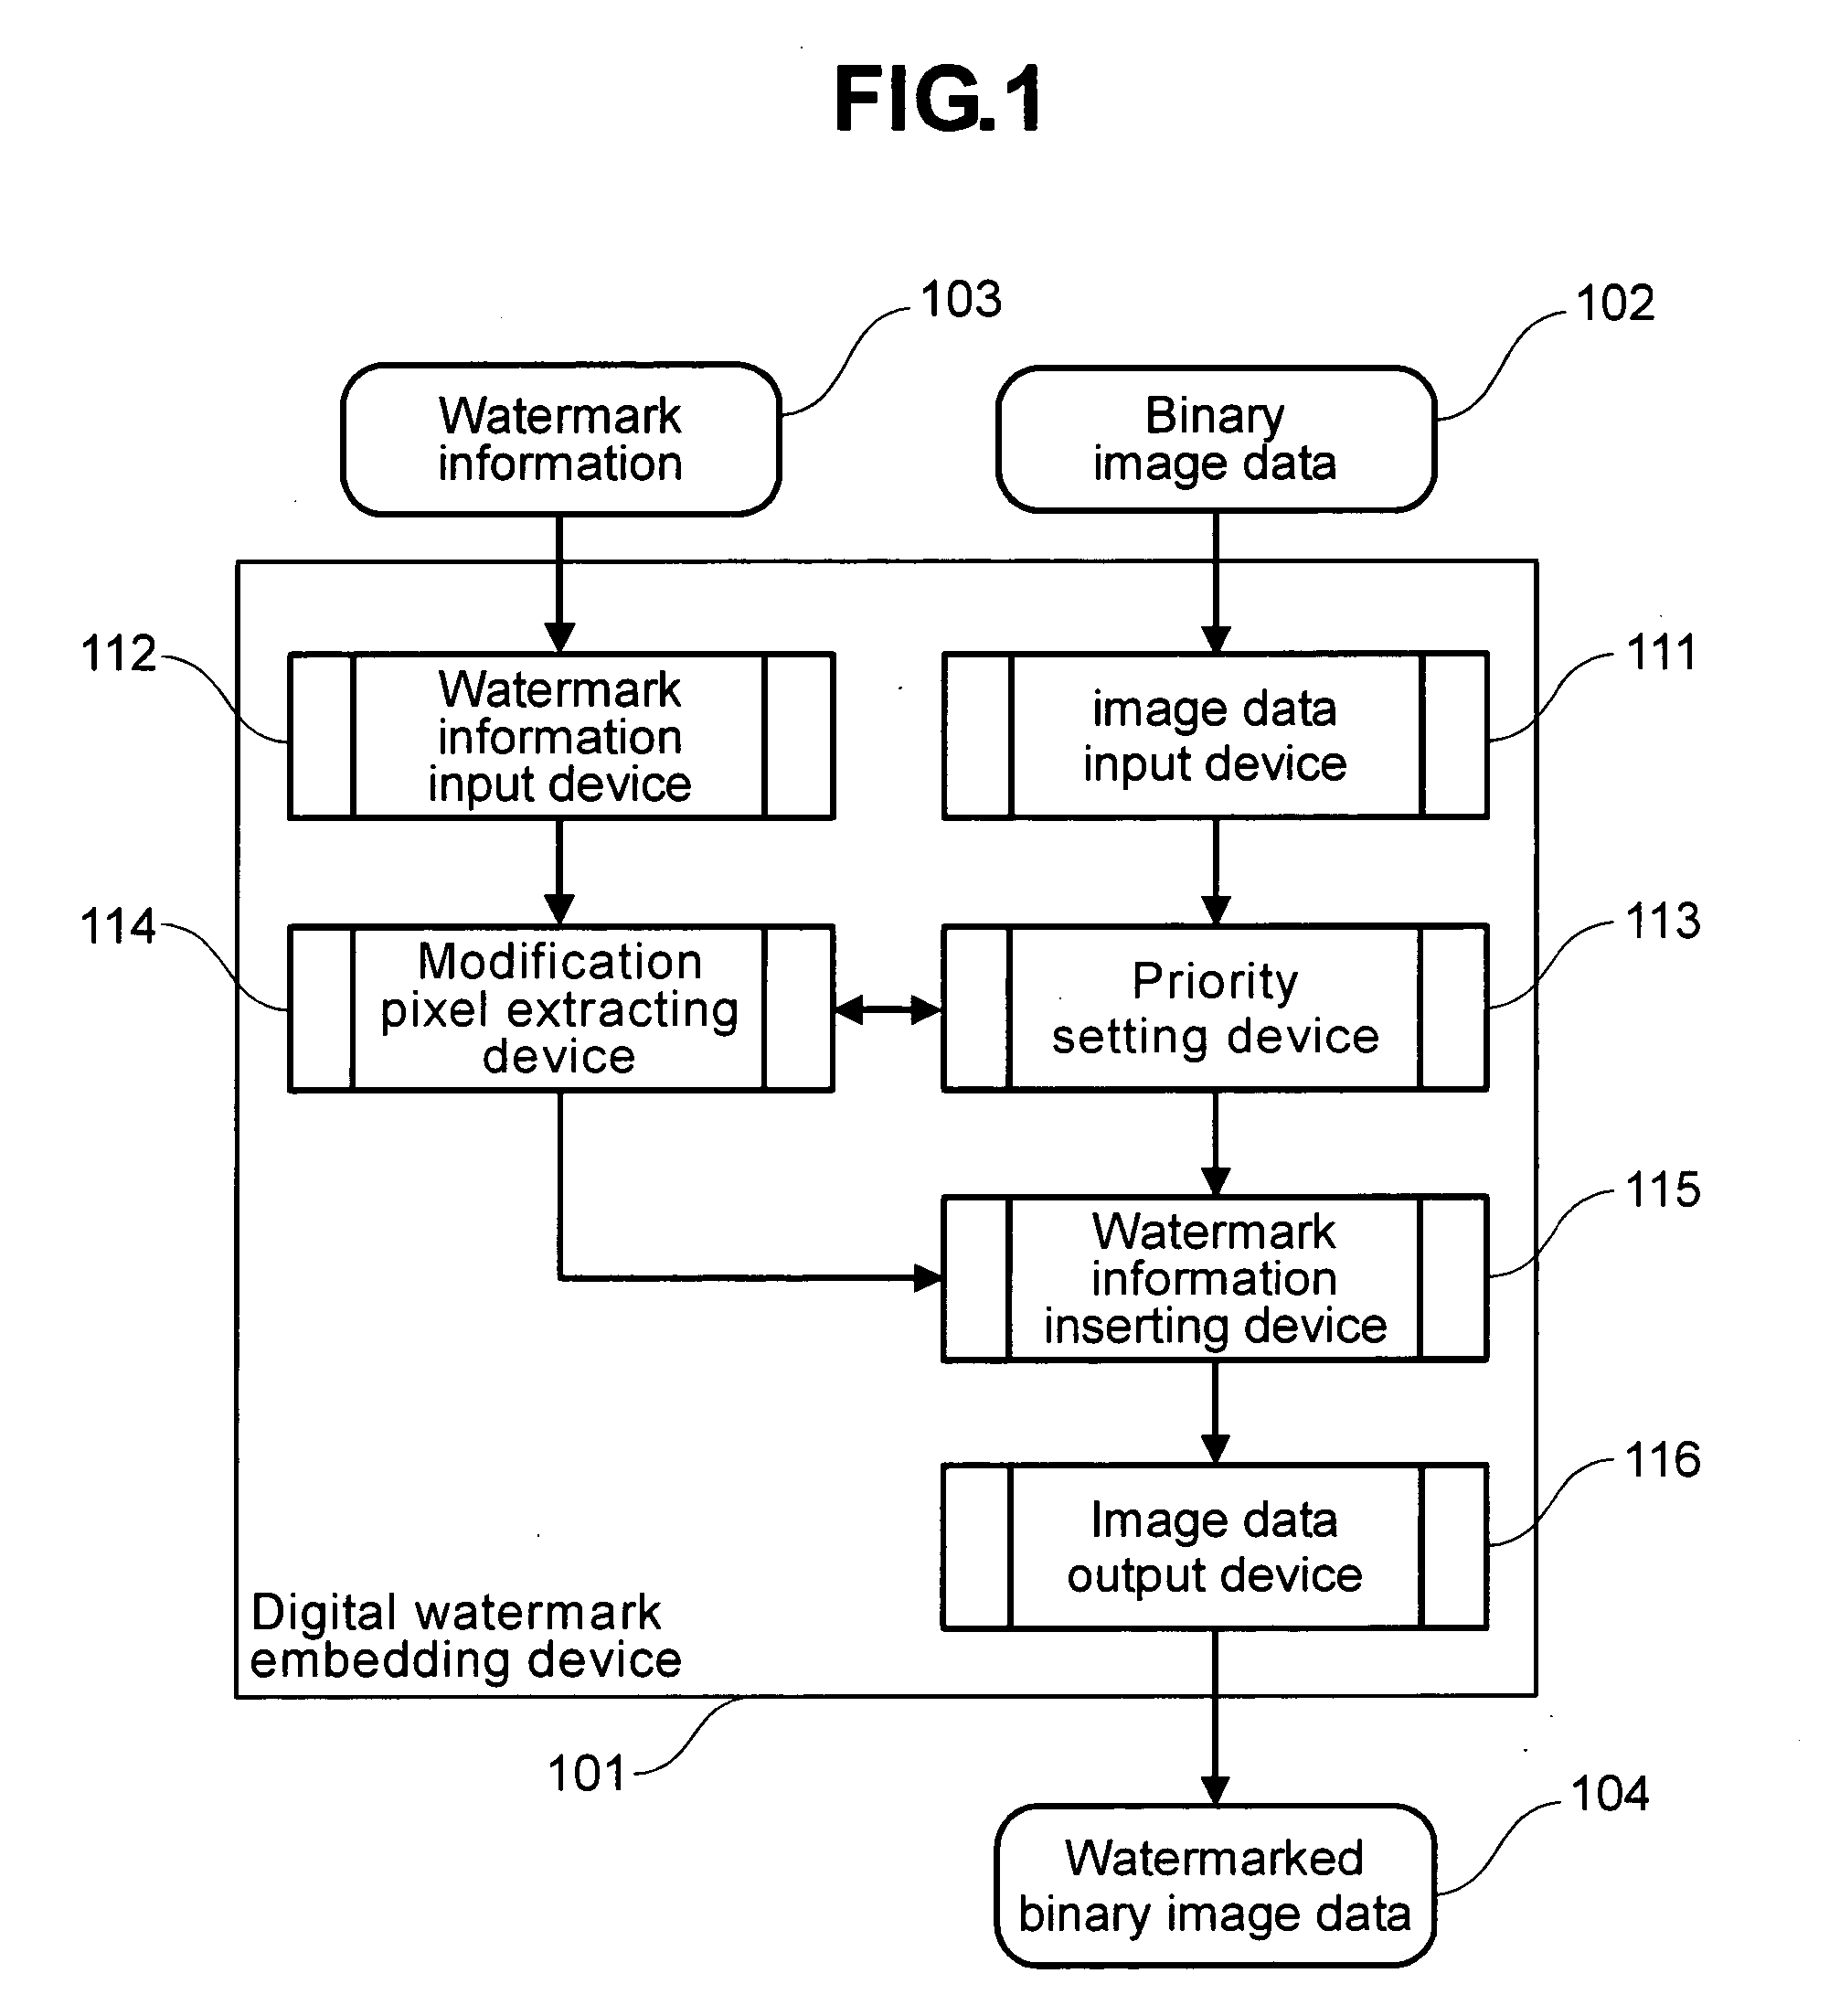 Method of watermarking for binary images